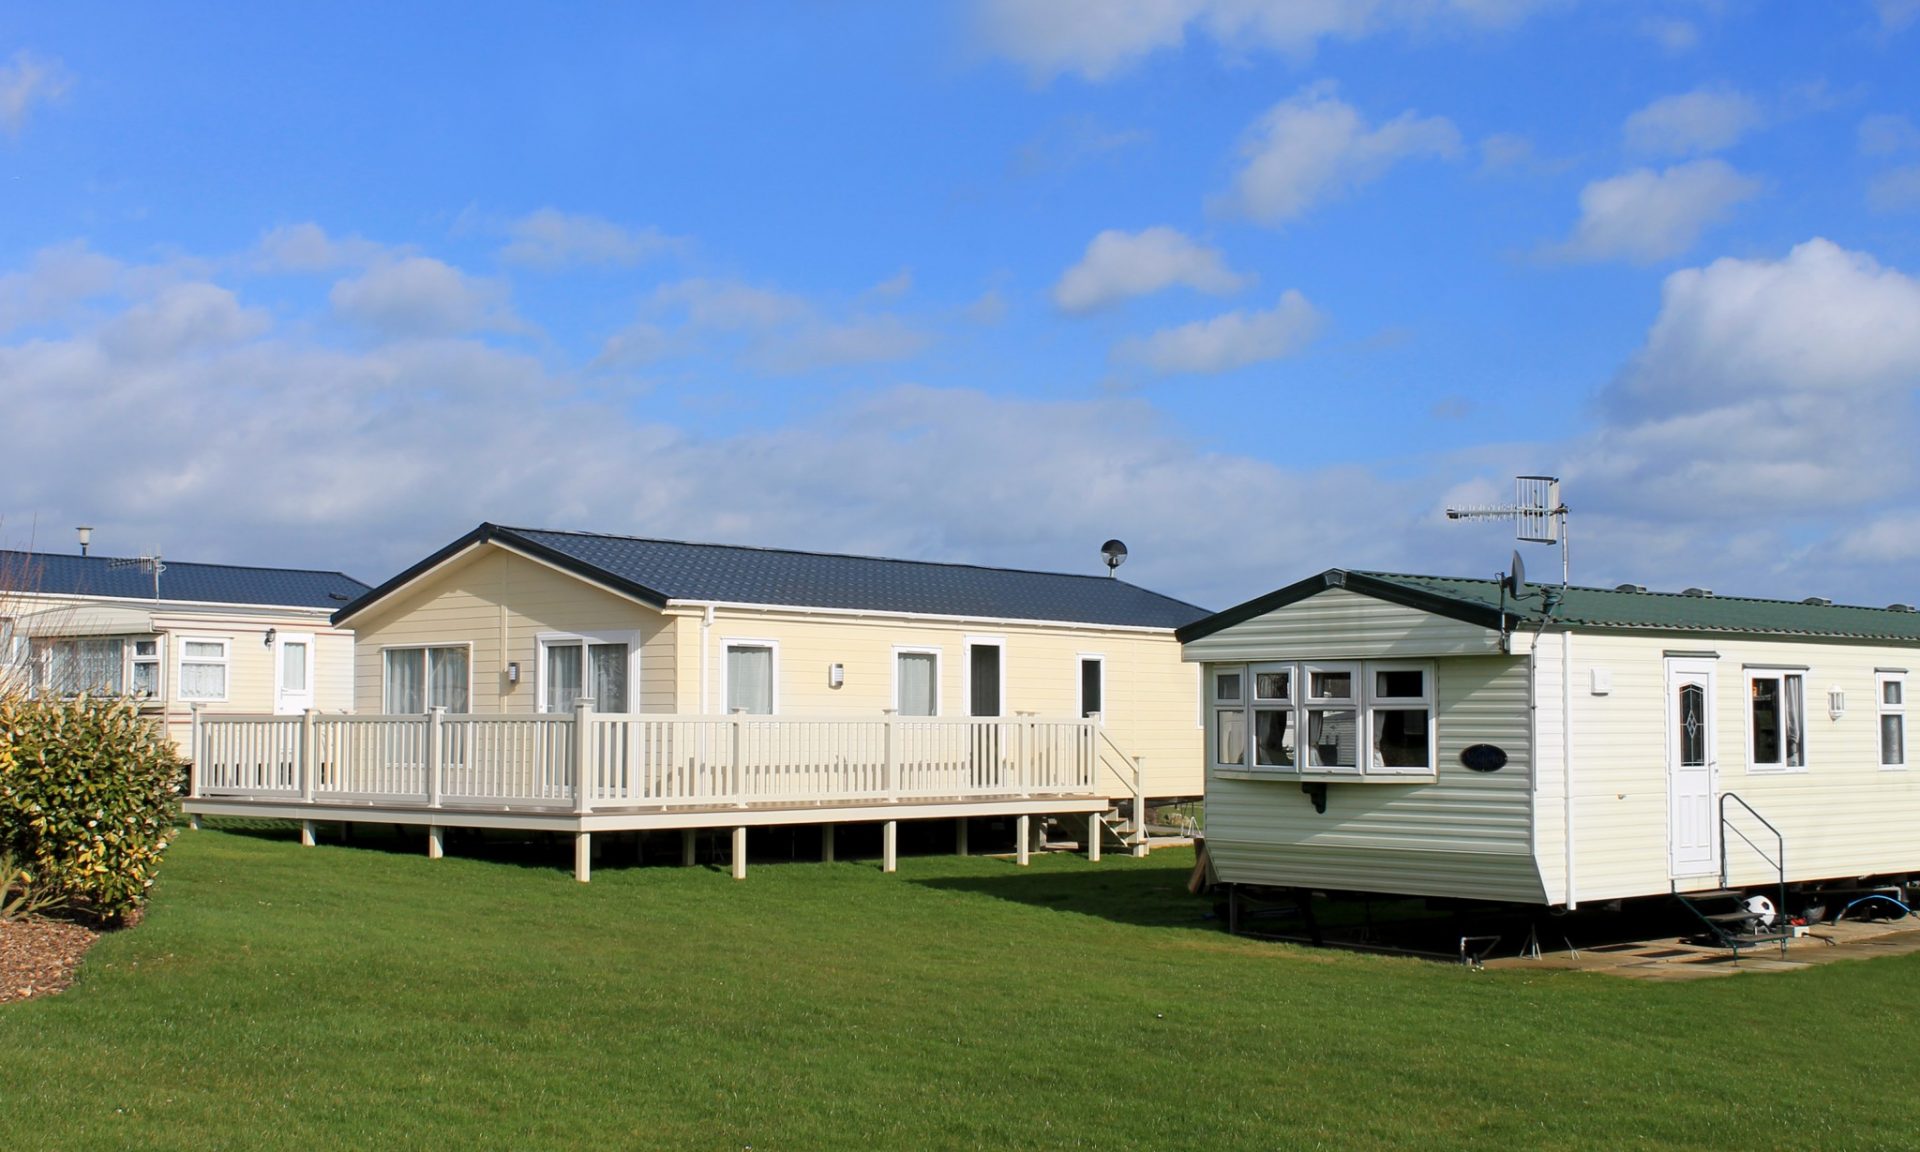 Manufactured Mobile Home Insurance A Complete Guide - Nerdwallet